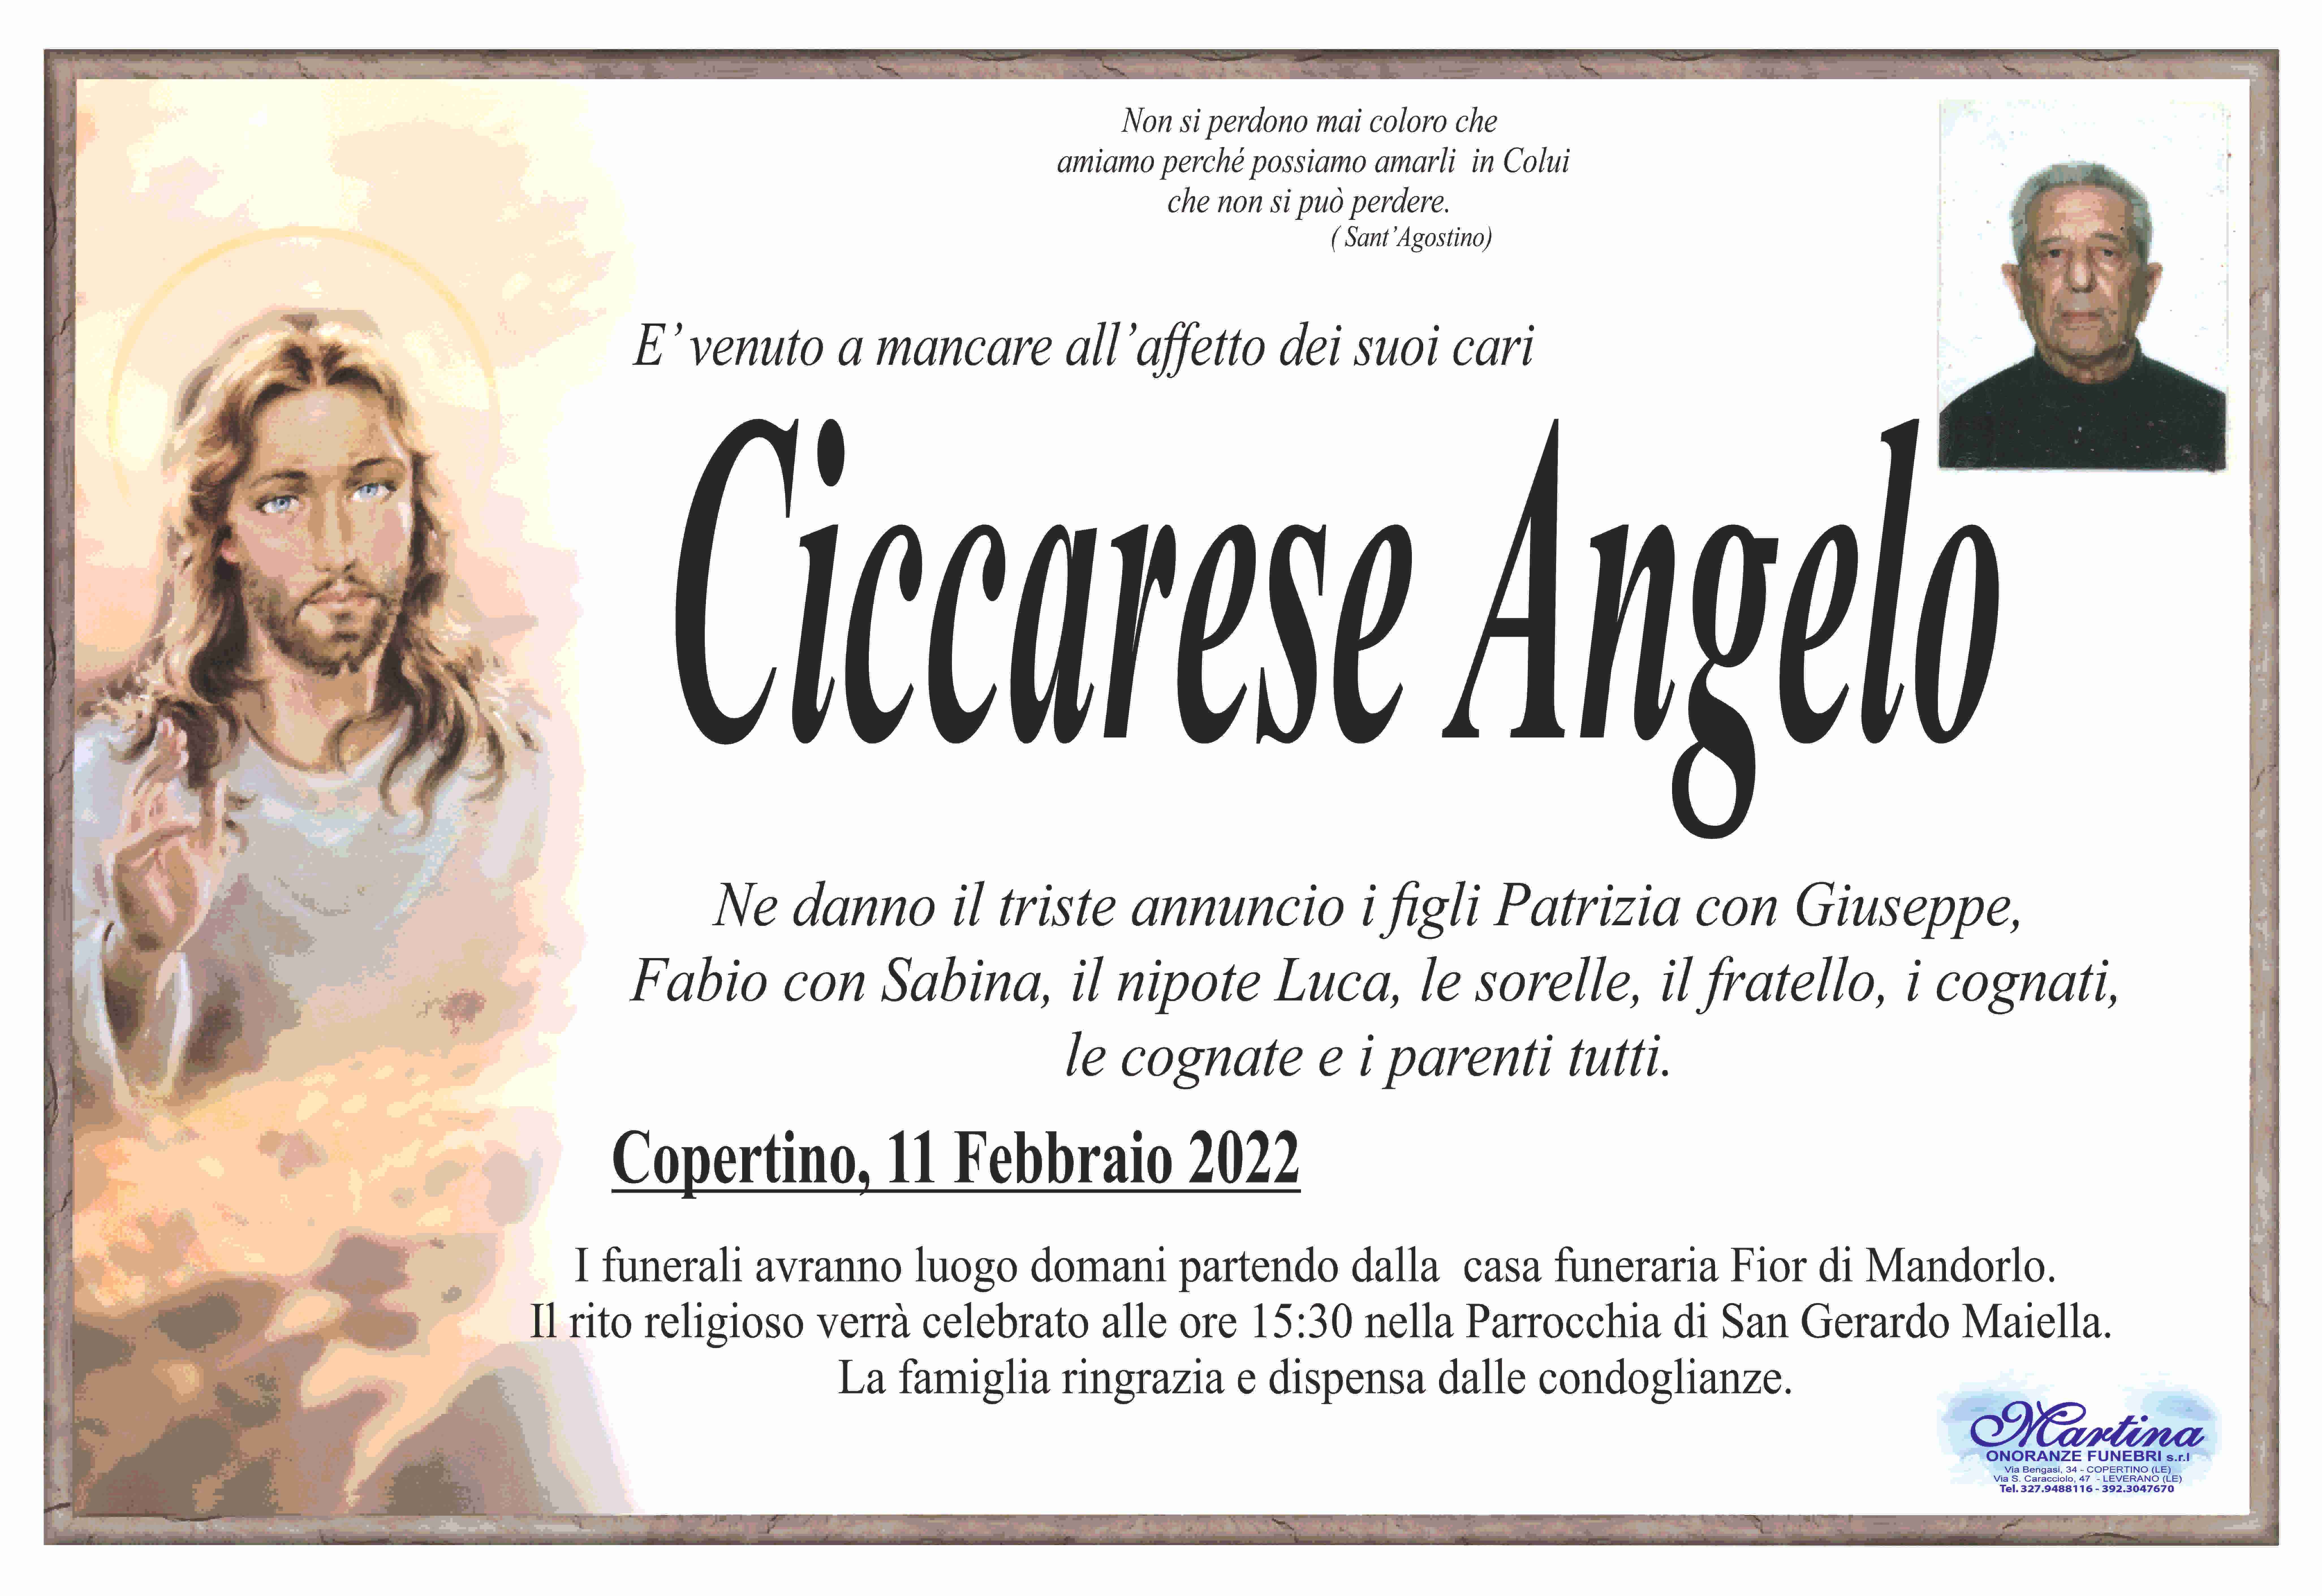 Angelo Ciccarese